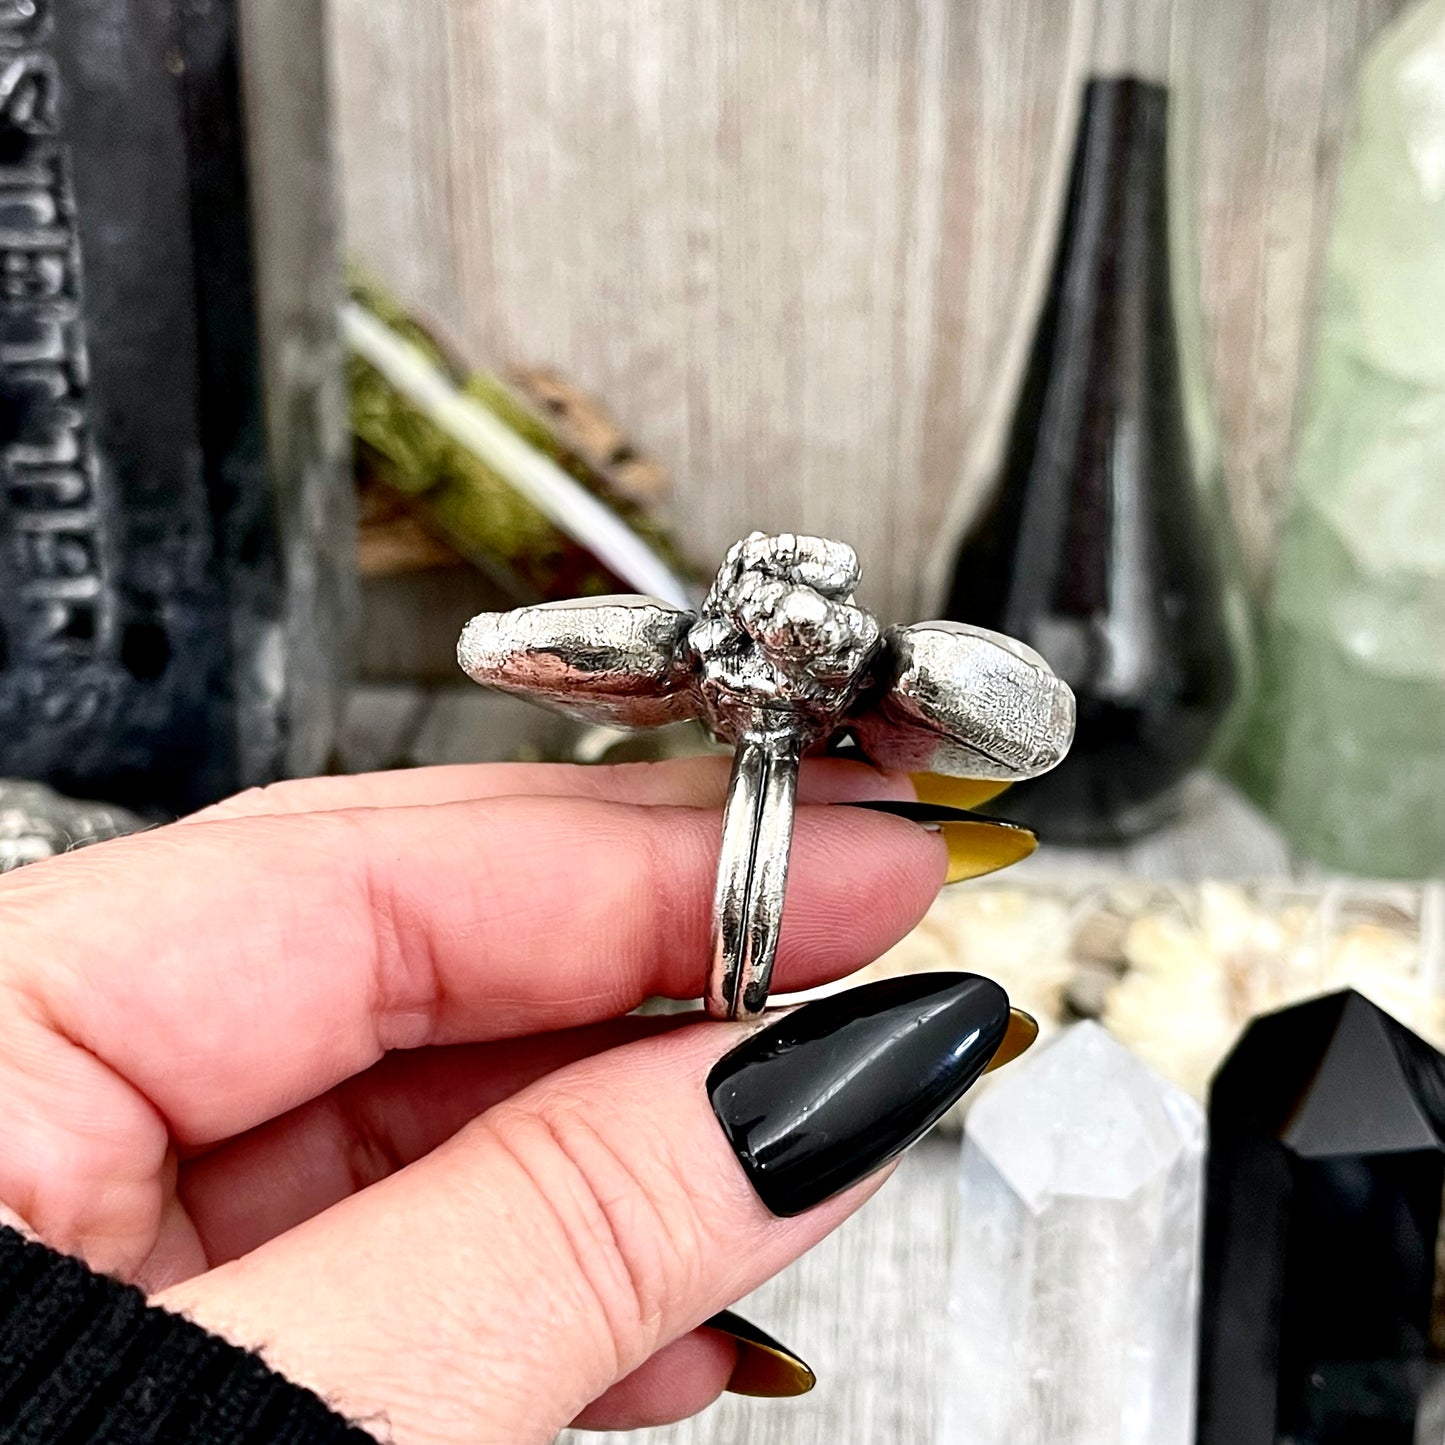 Size 8 Crystal Ring - Three Stone Clear Quartz Ring in Silver / Foxlark Collection - One of a Kind